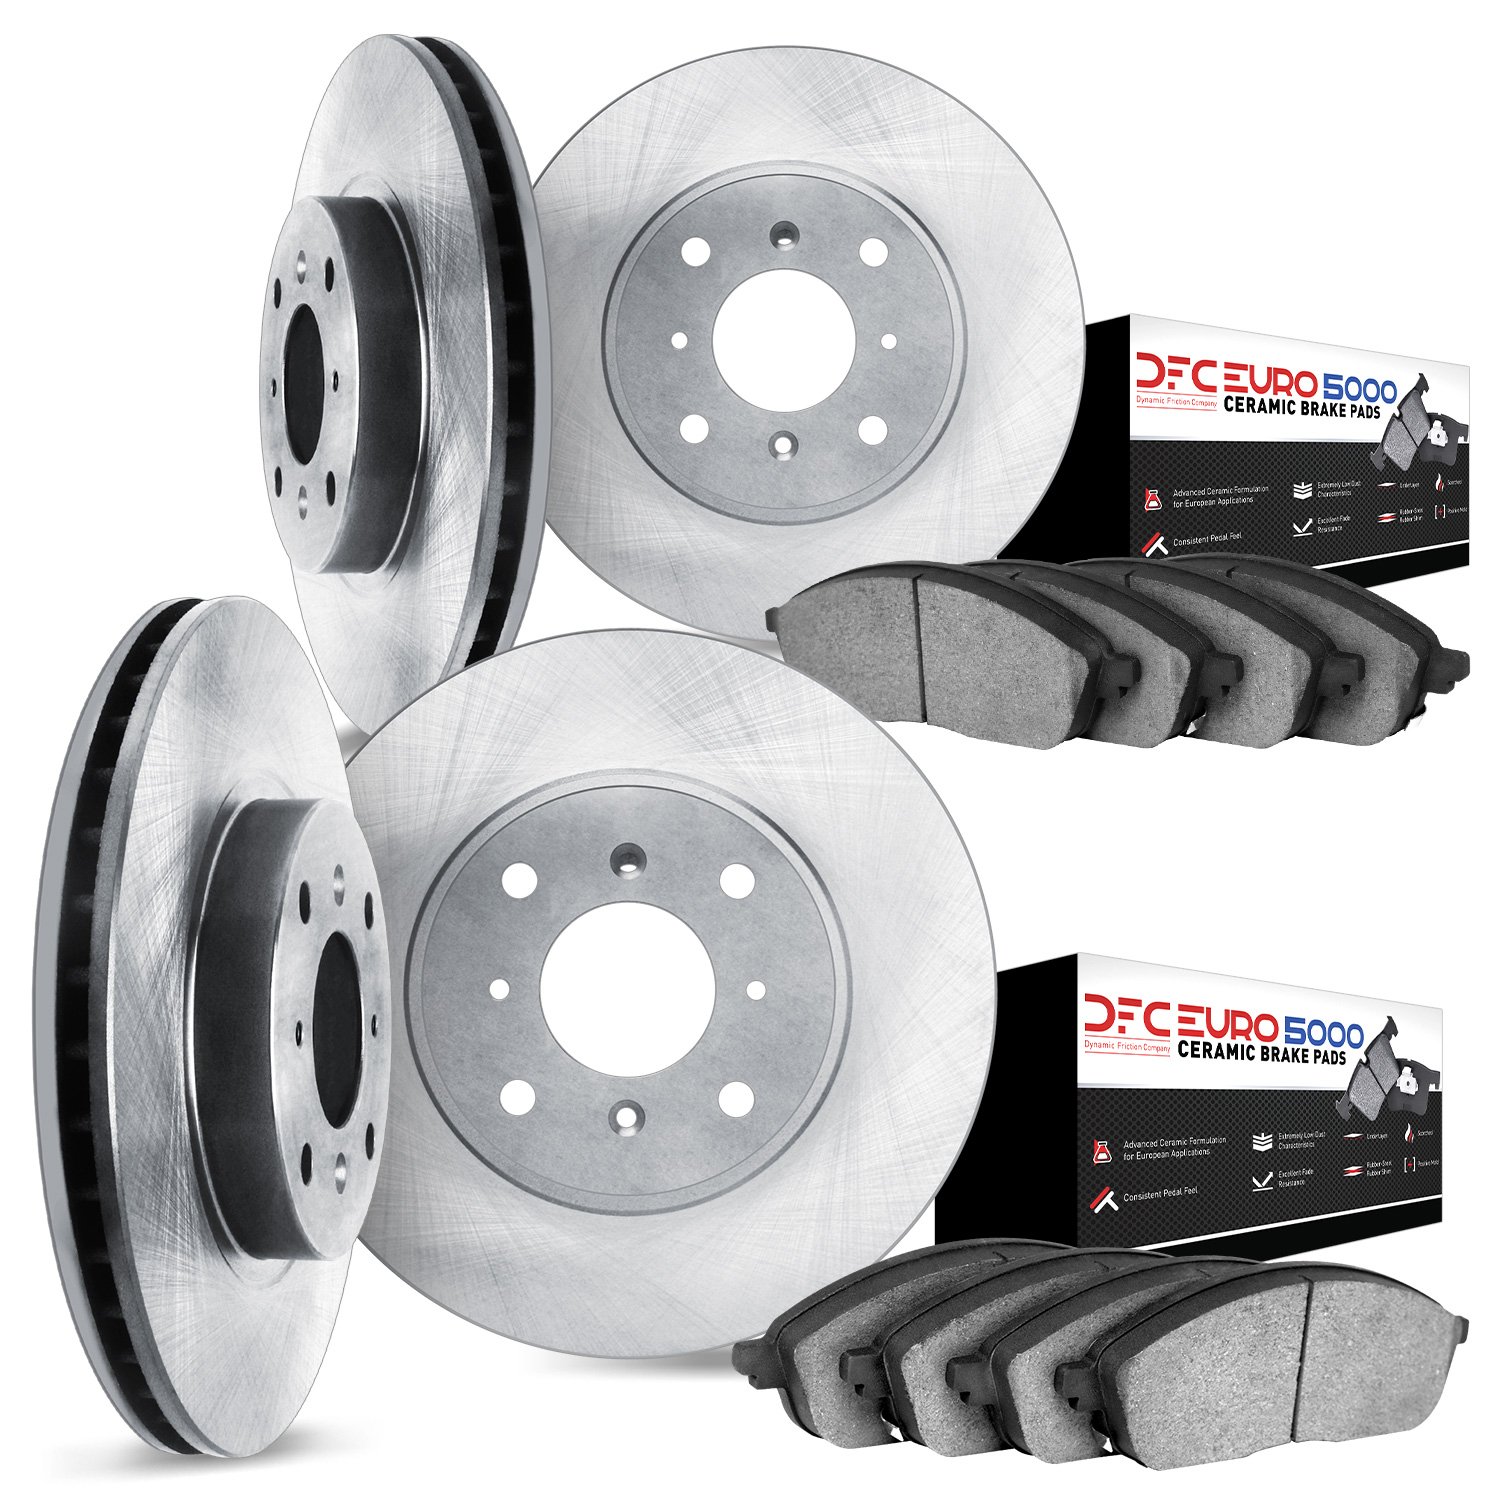 6604-56001 Brake Rotors w/5000 Euro Ceramic Brake Pads, 1998-2000 Ford/Lincoln/Mercury/Mazda, Position: Front and Rear